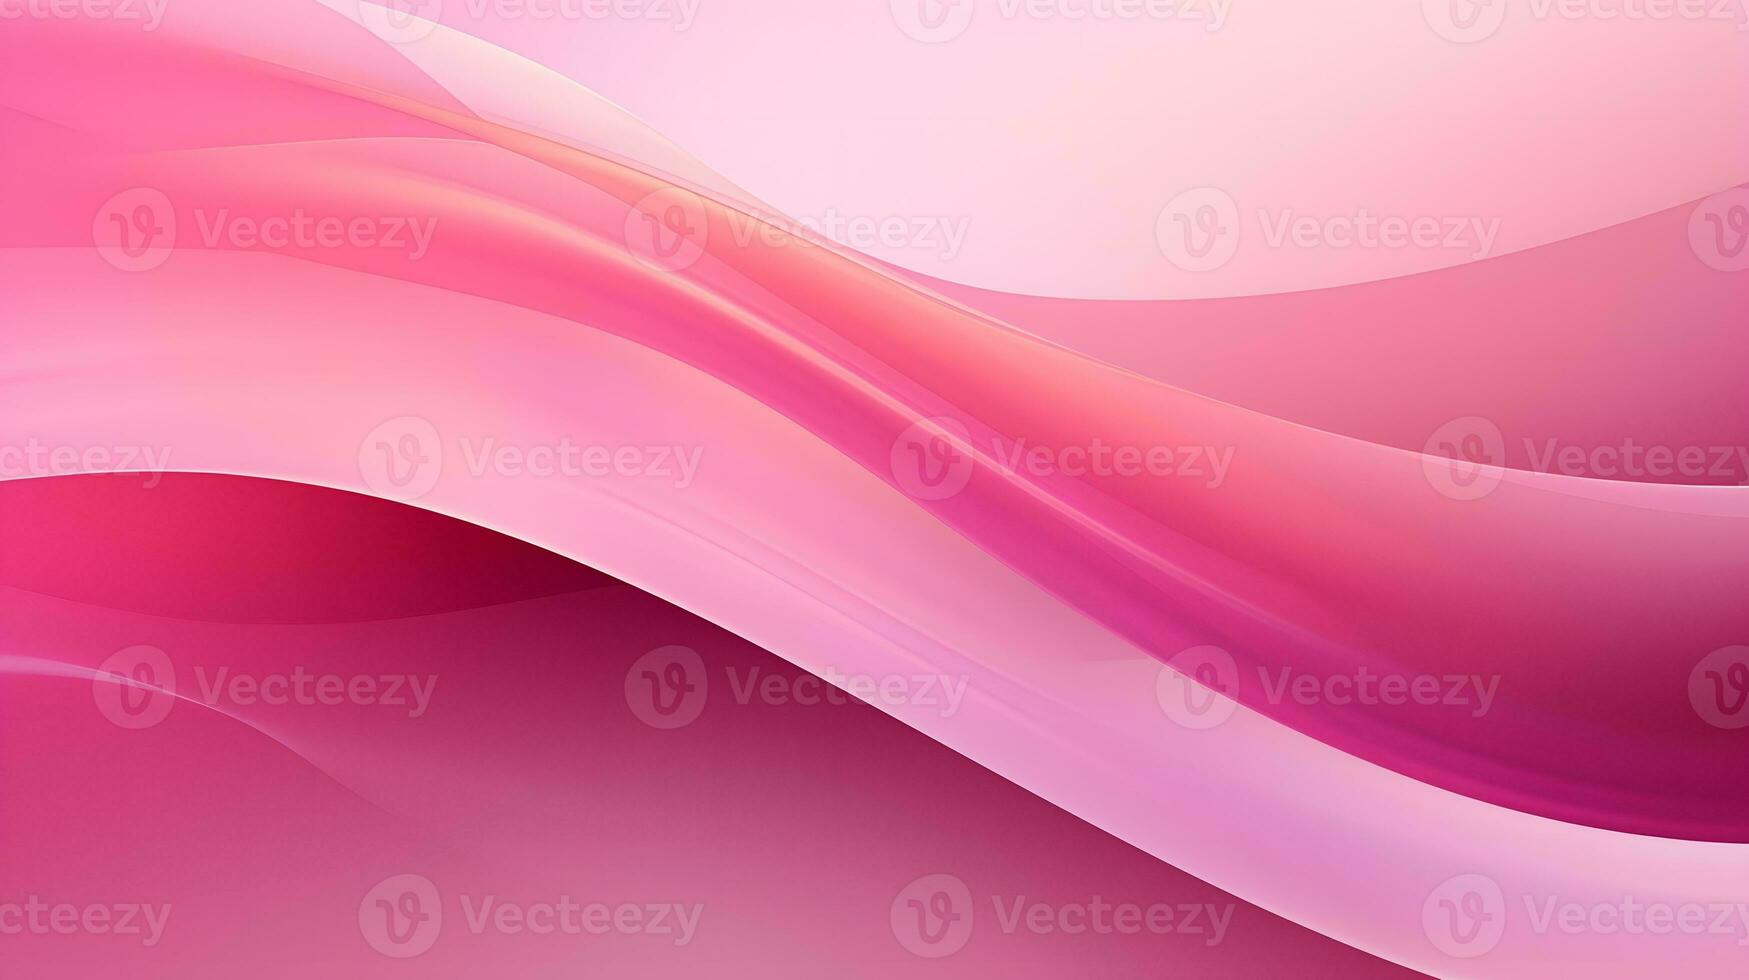 Pink curve abstract background wallpaper photo